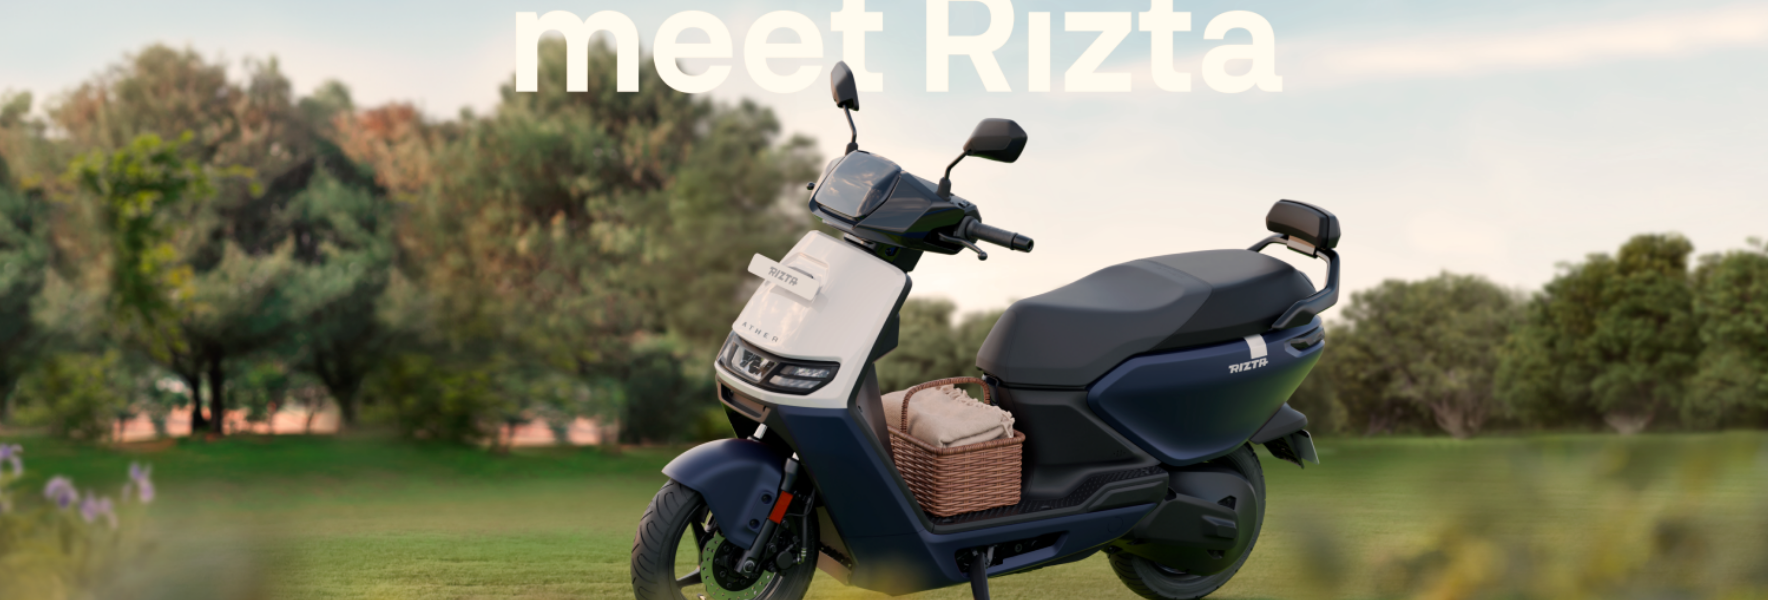 Ather Rizta Scooter